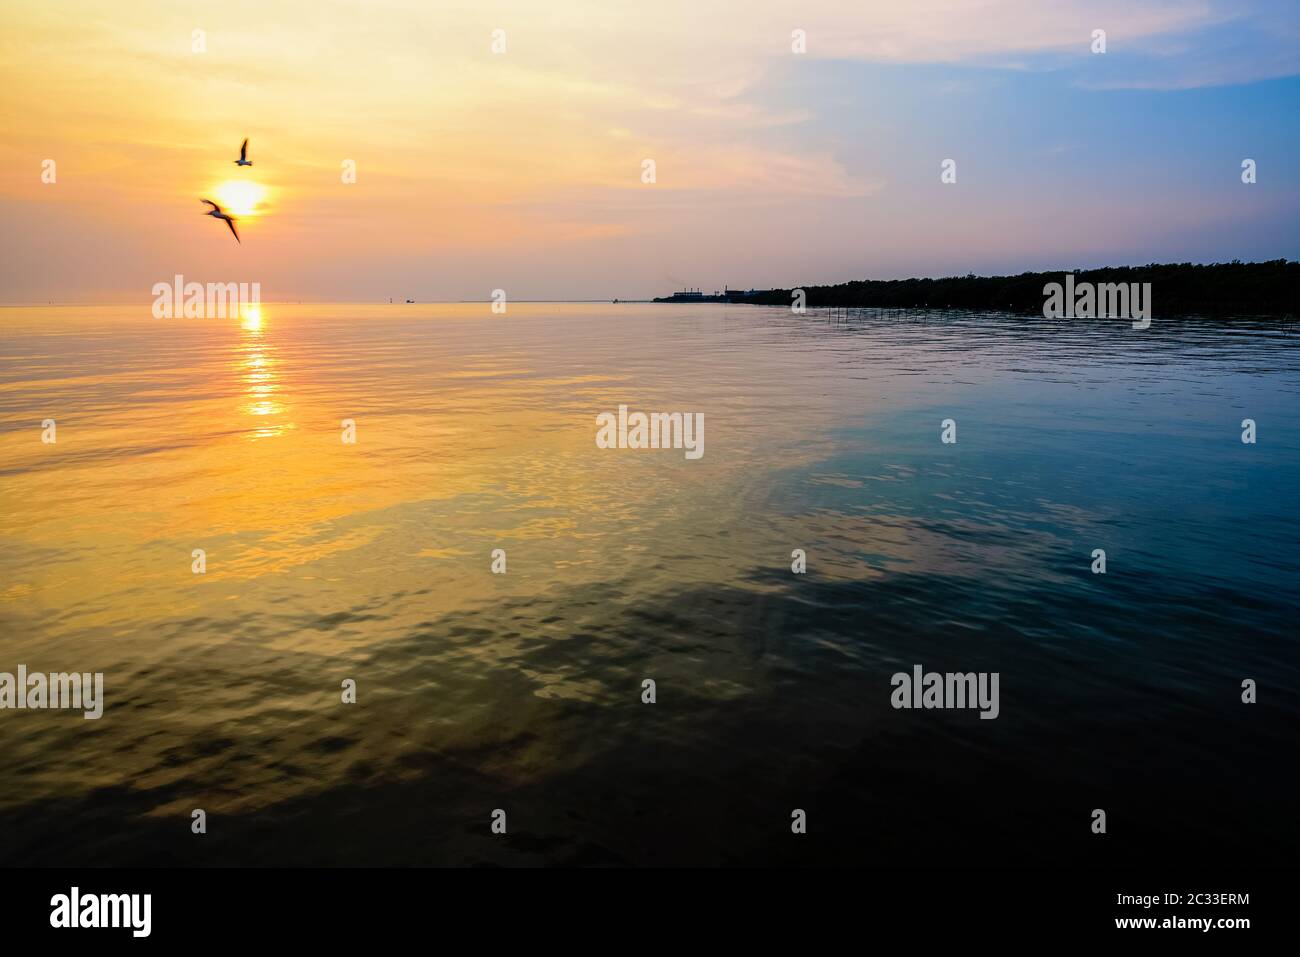 Beautiful nature landscape for background bright sun golden sunlight reflect the water, two birds a pair of seagulls flying on yellow, orange sky at s Stock Photo